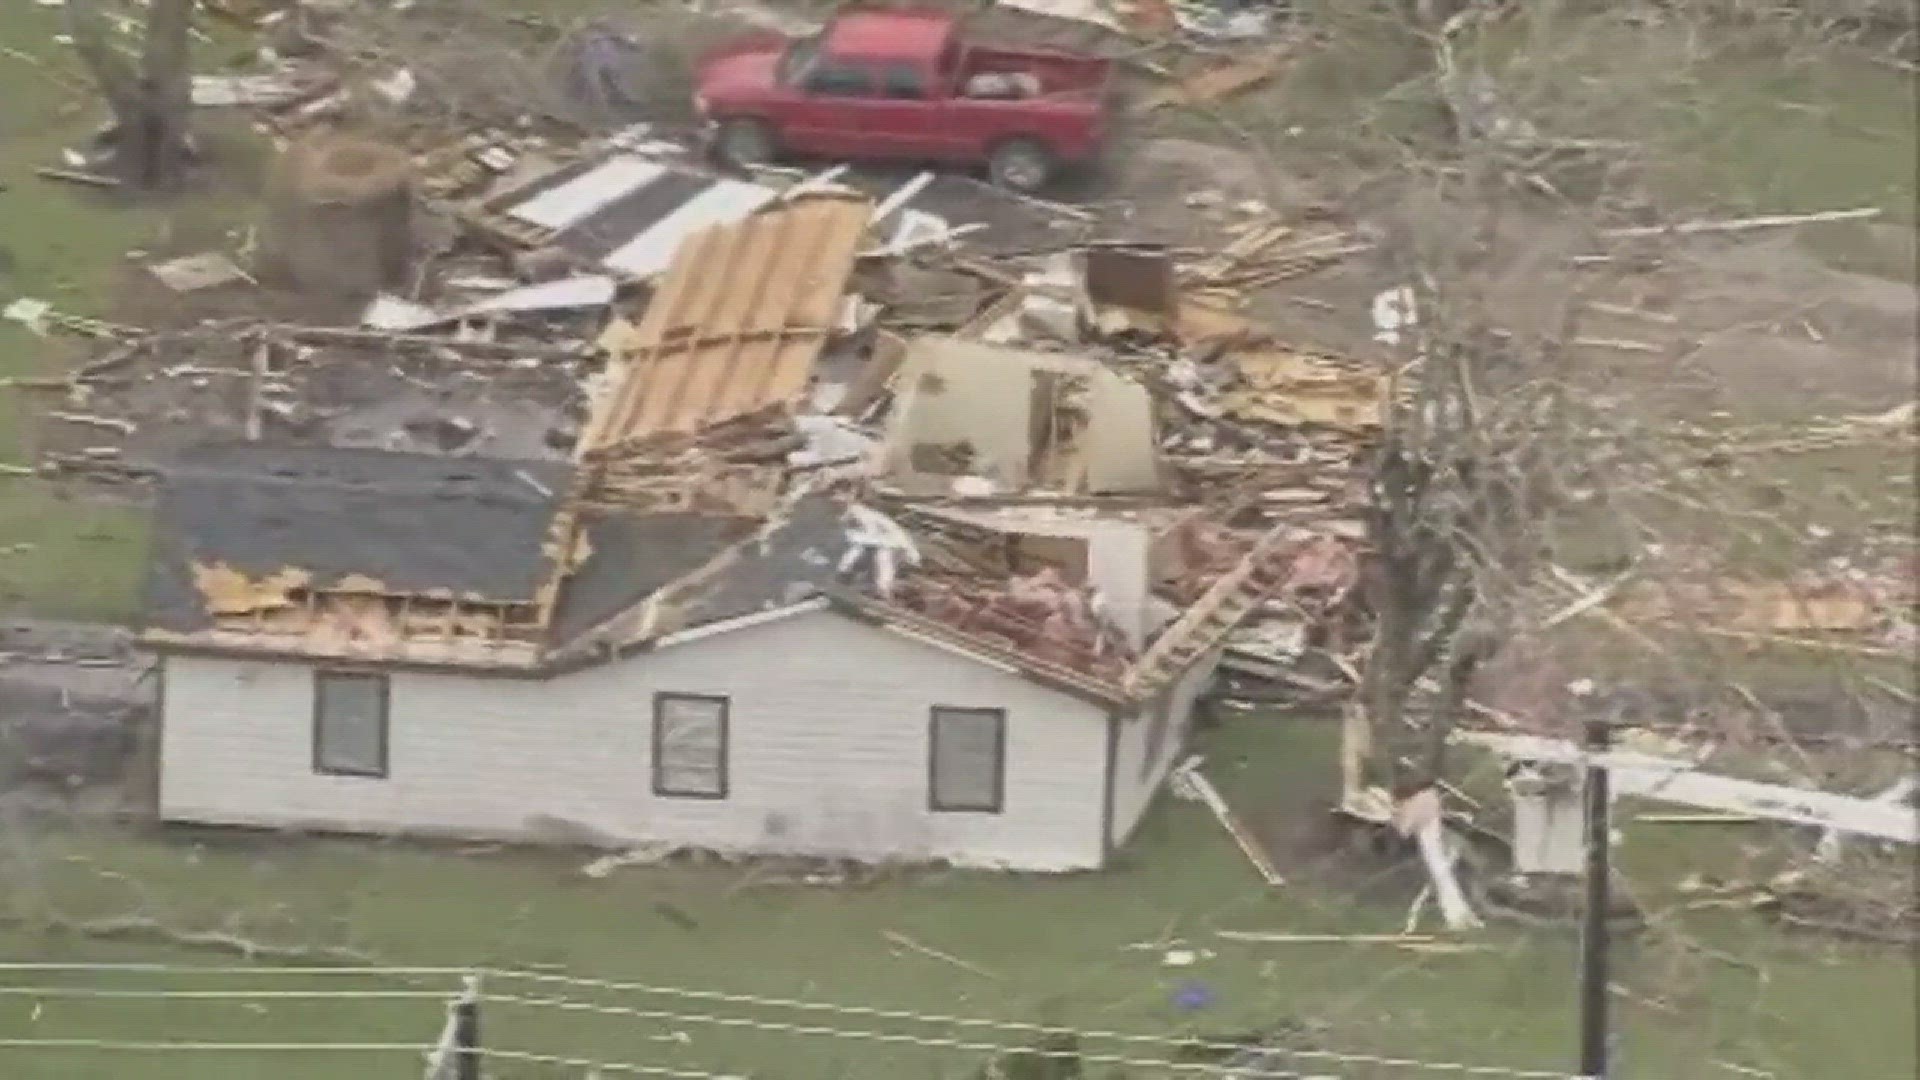 Air 11 flew over the damage after strong storms moved through Tuesday.